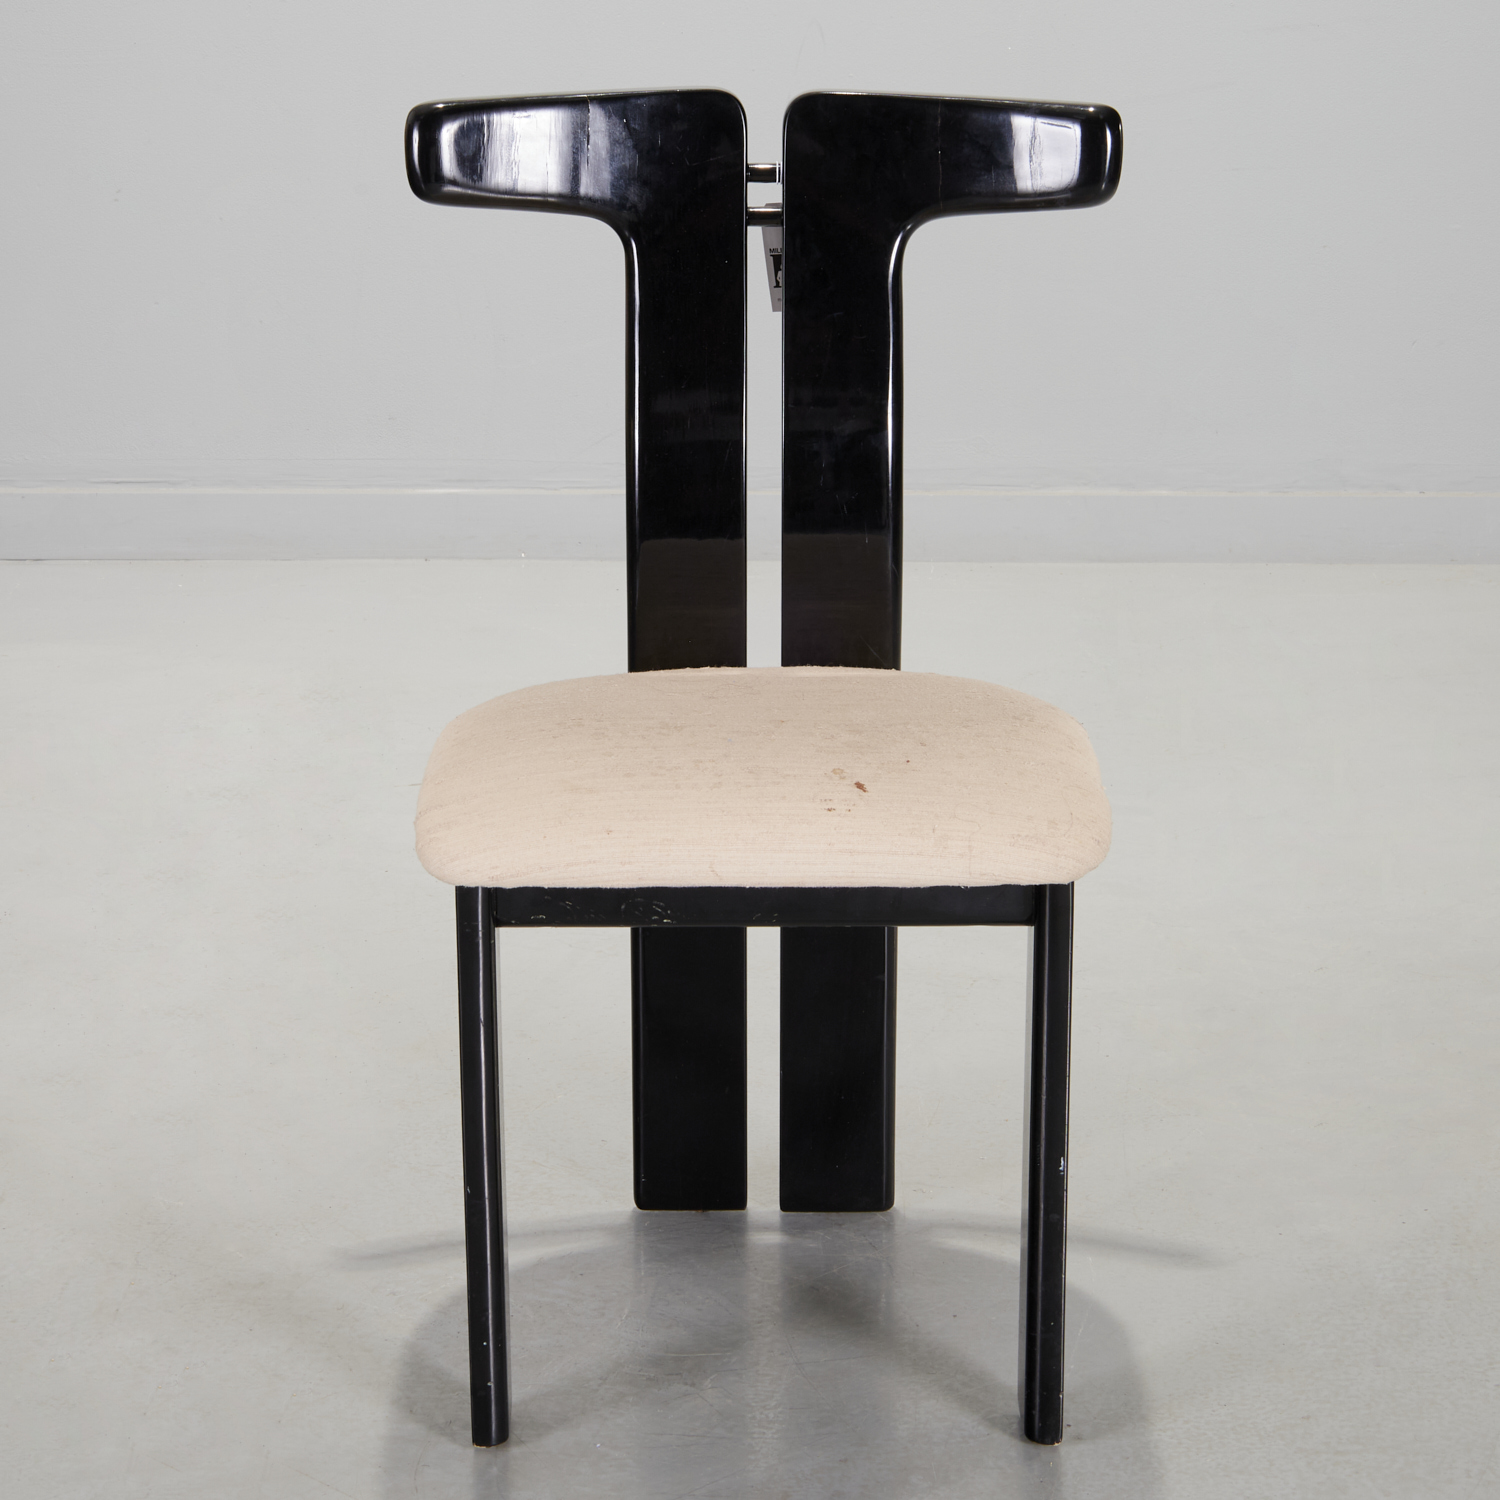 PIERRE CARDIN LACQUERED SIDE CHAIR 30bdf4